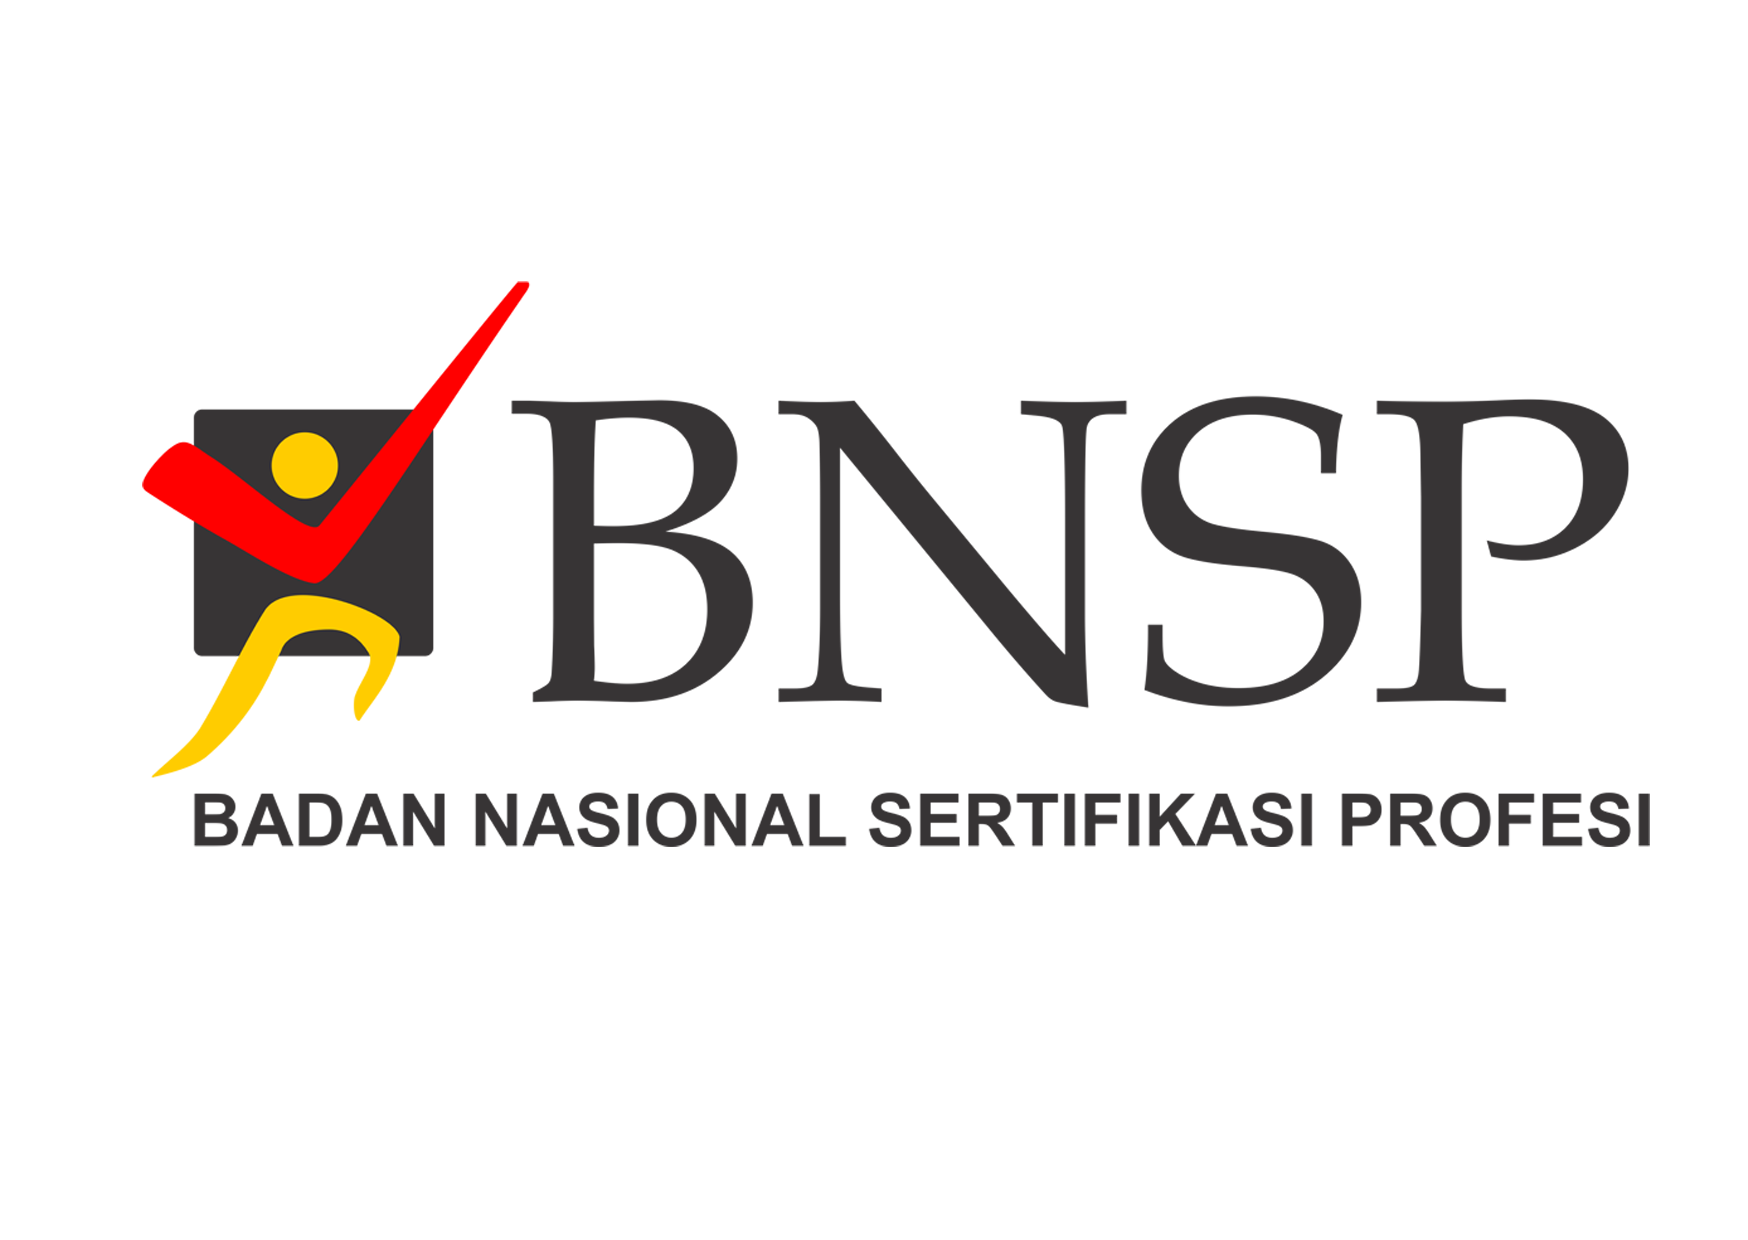 BNSP - Indonesia